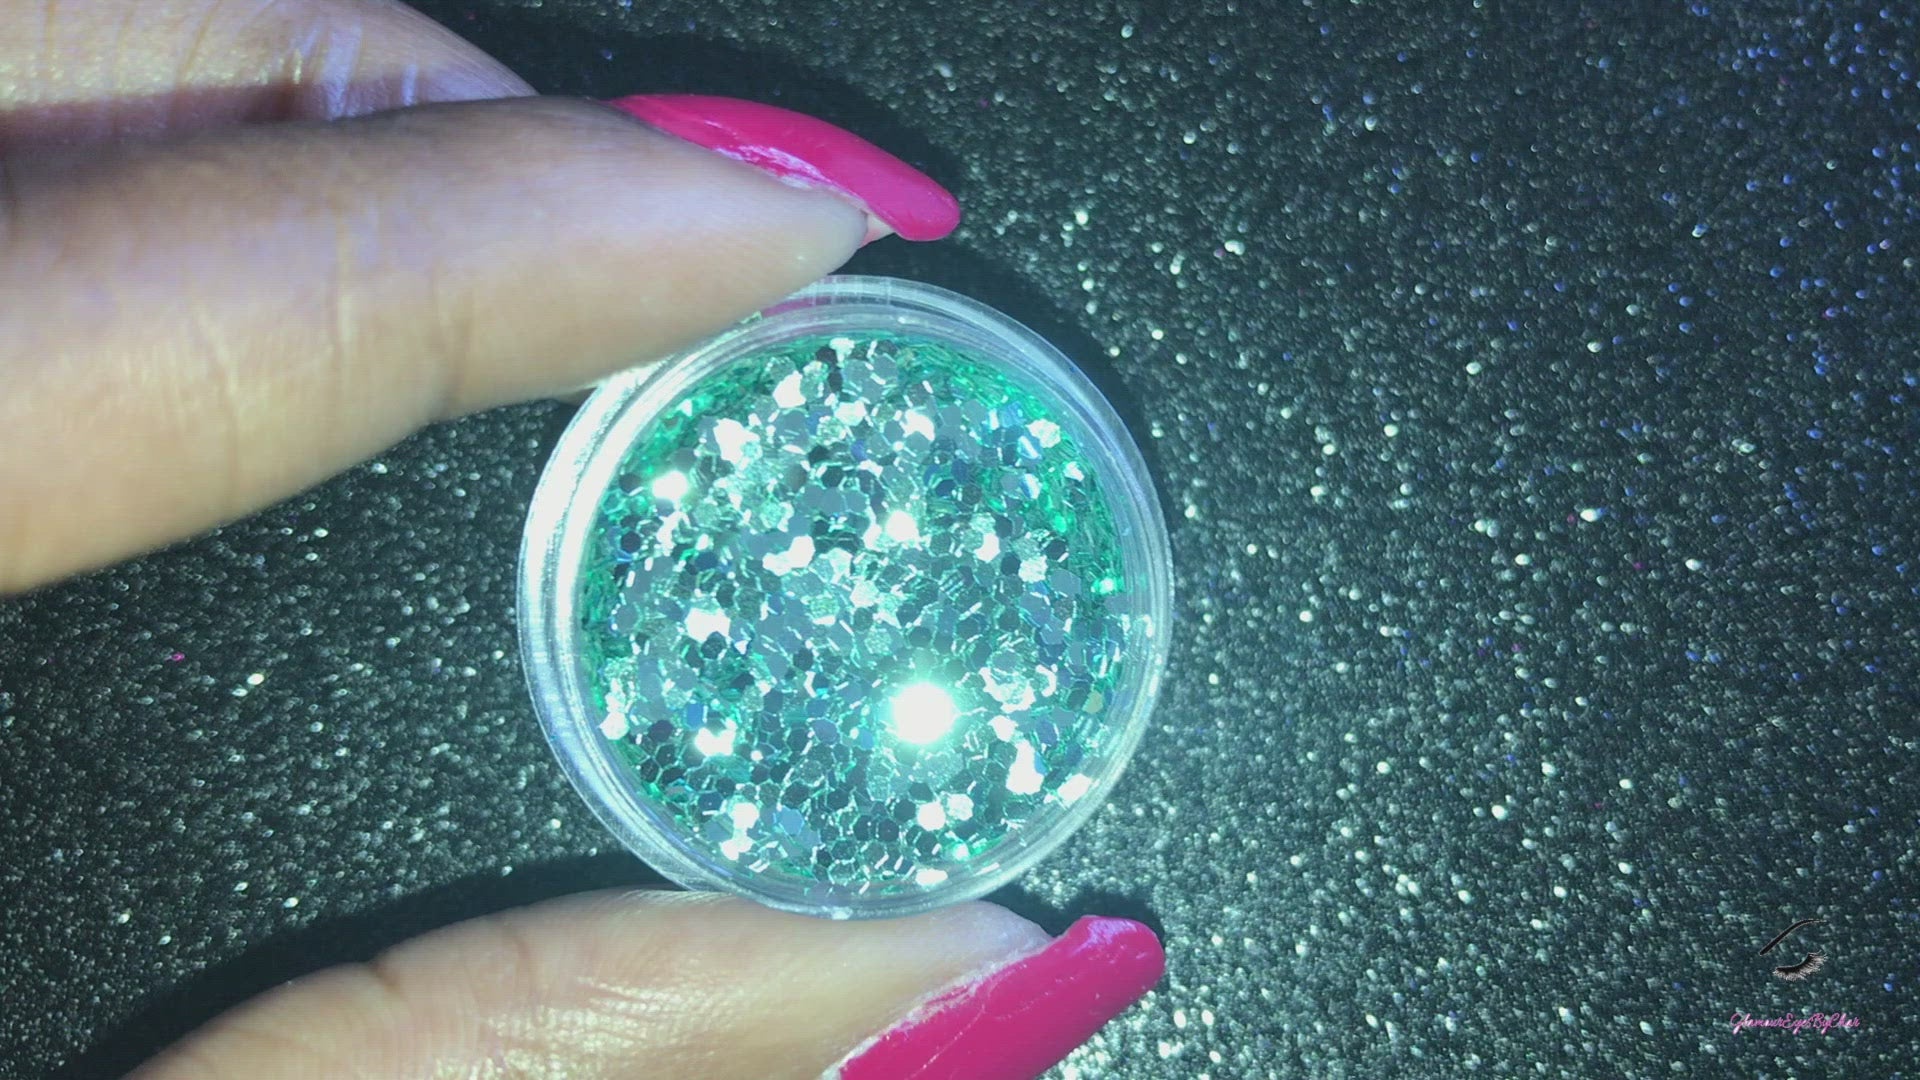 This glitter is called Caicos and is part of the simple glitter collection. It consists of a light teal glitter with a beautiful sparkle. Flake size is larger than fine and extra fine glitter. Caicos can be used for your face, body, hair and nails. Comes in 5g jars only. **Glitter will be discontinued once sold out**